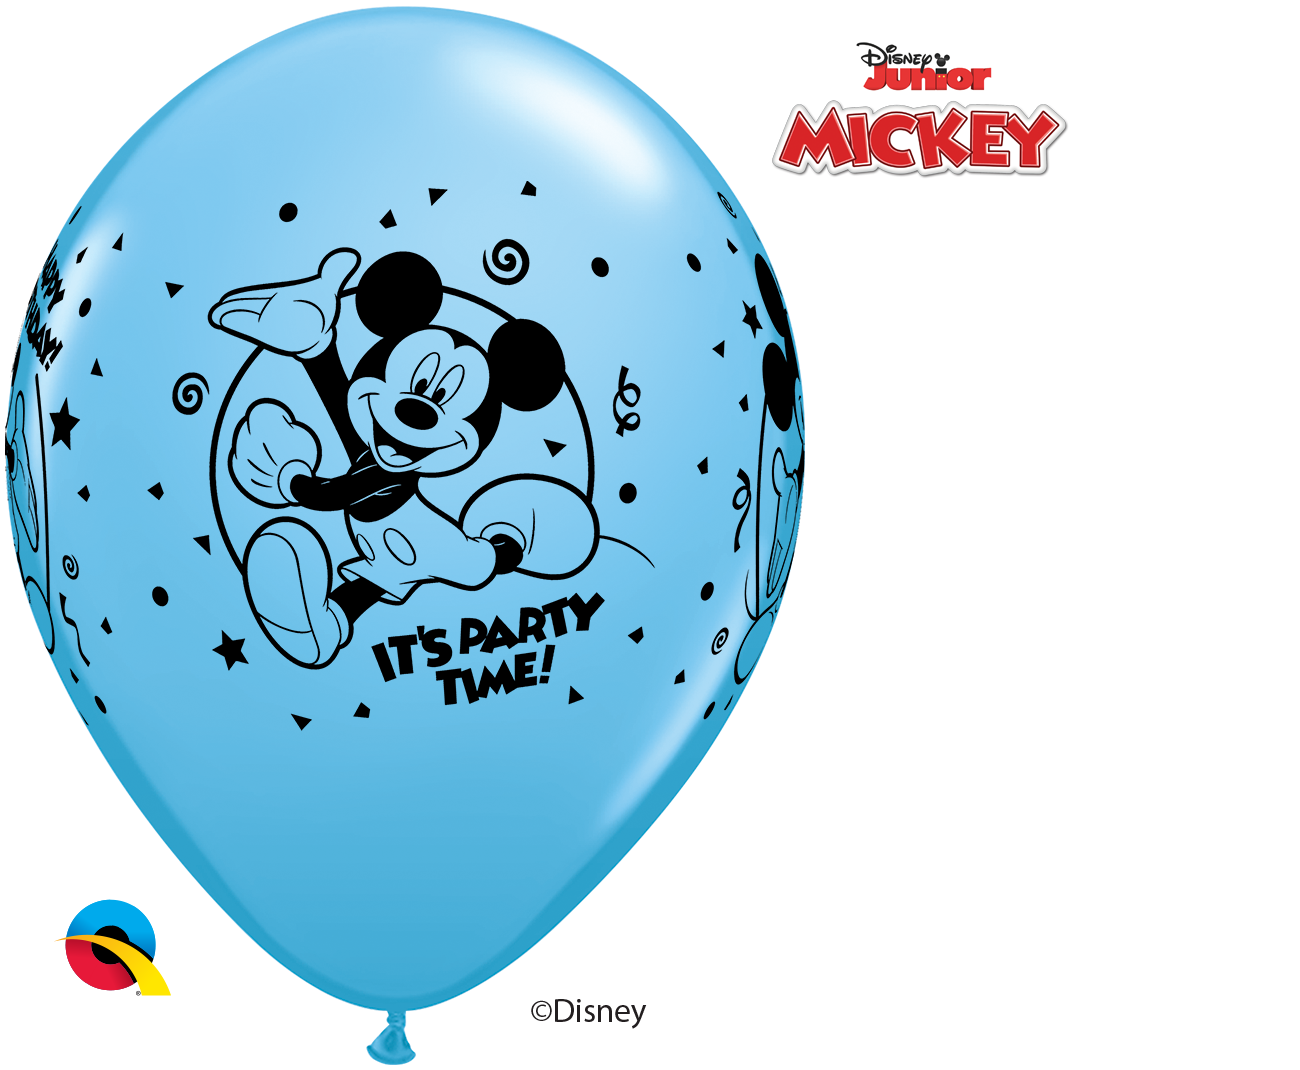 Latex - HBD Mickey Mouse